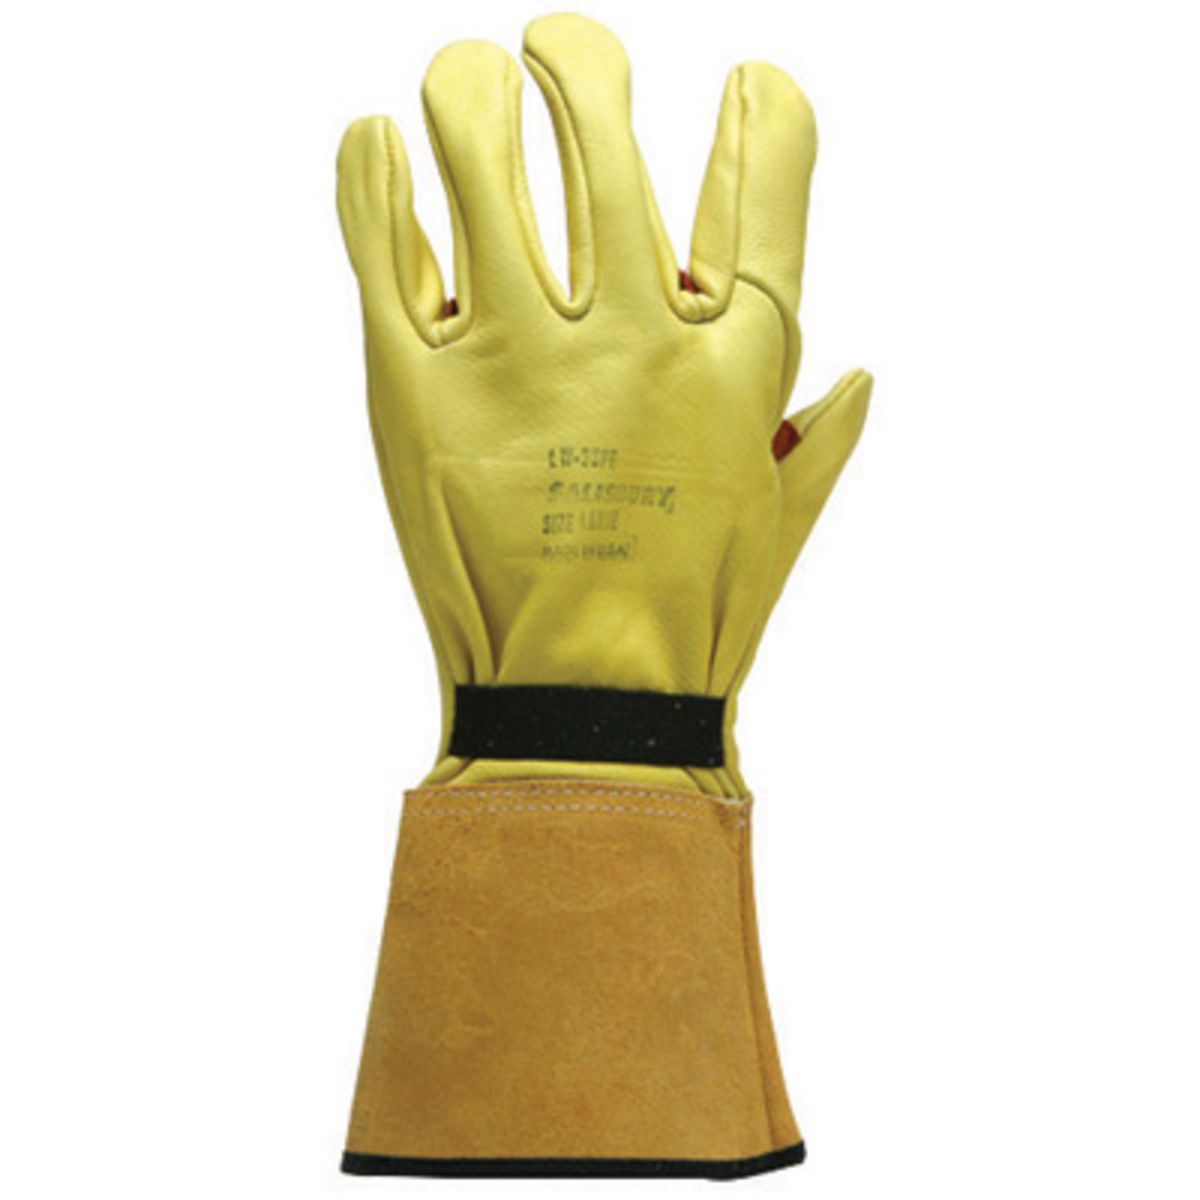 Salisbury by Honeywell Small High Quality Grain Cowhide Linesmen's Work Gloves With Pigskin Cuff